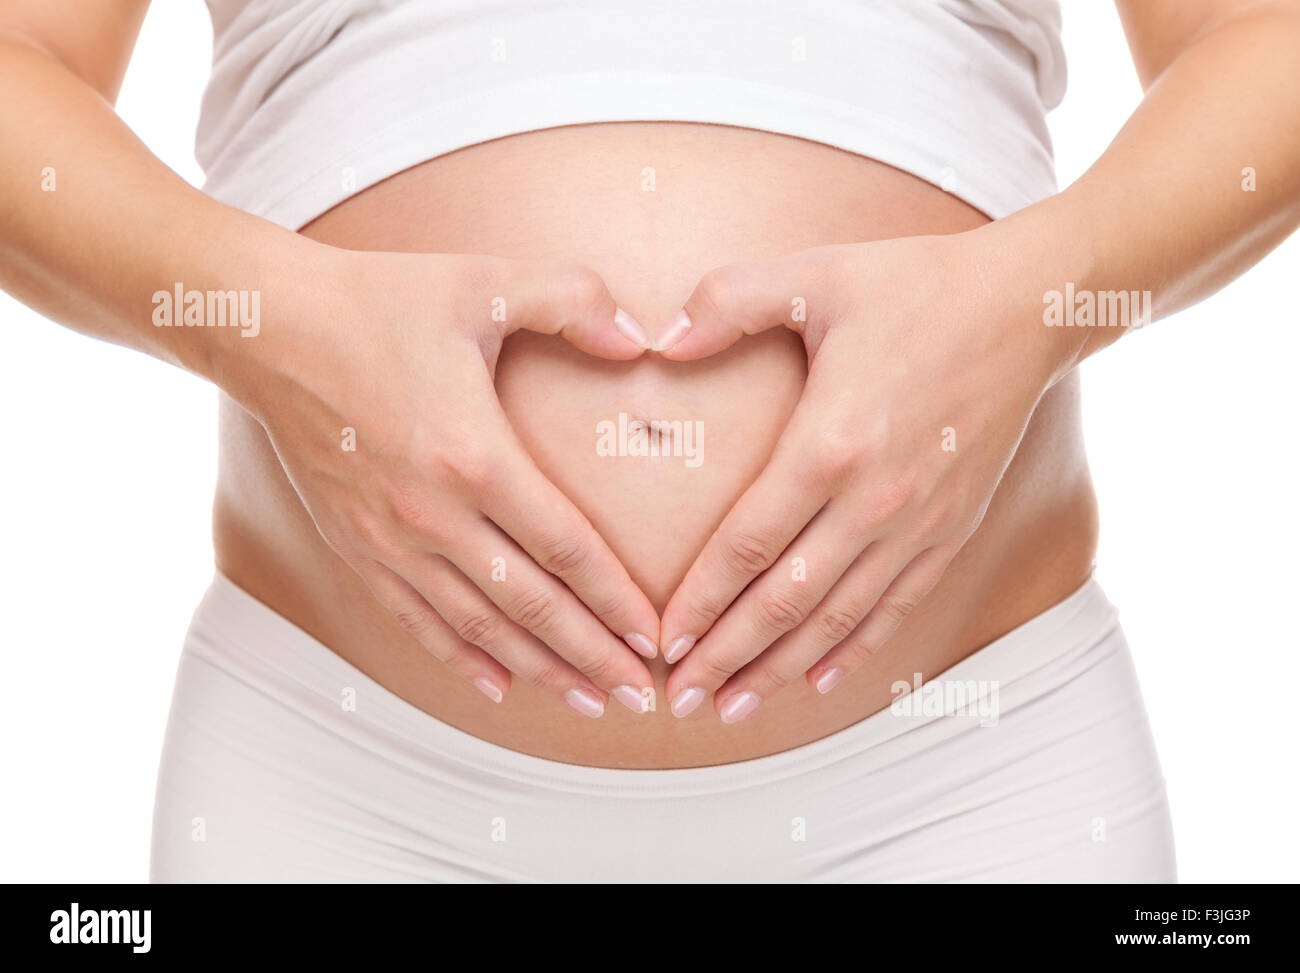 Pregnant woman loving her unborn baby Stock Photo